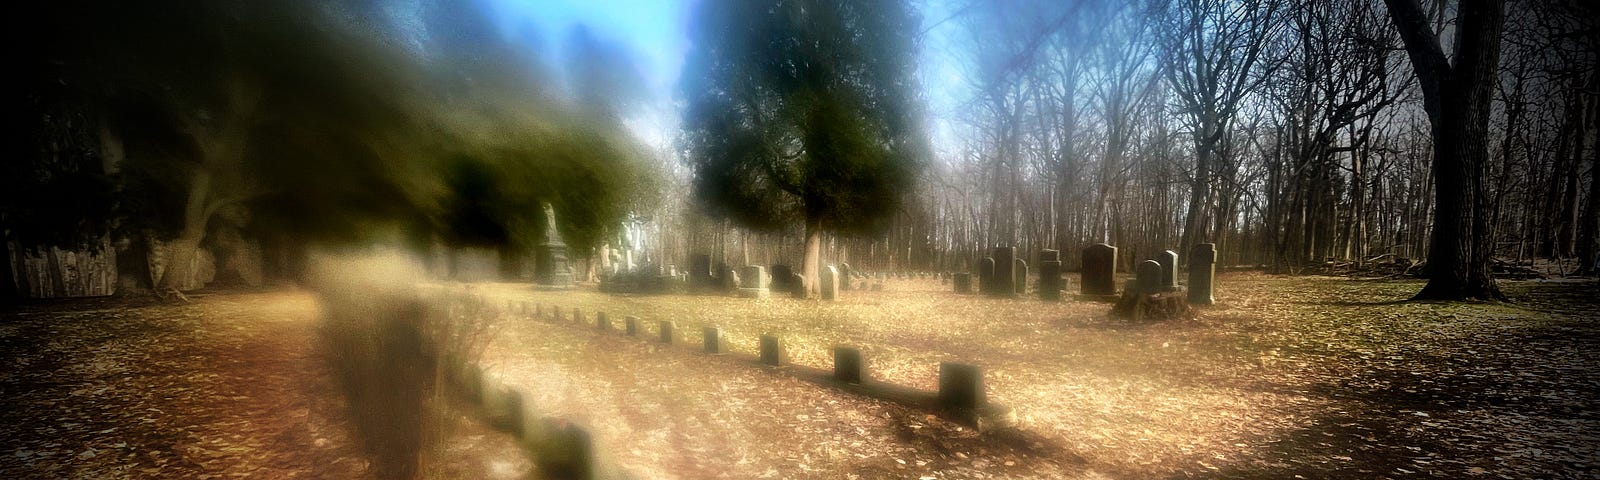 Picture of a cemetary, some of it is blurred